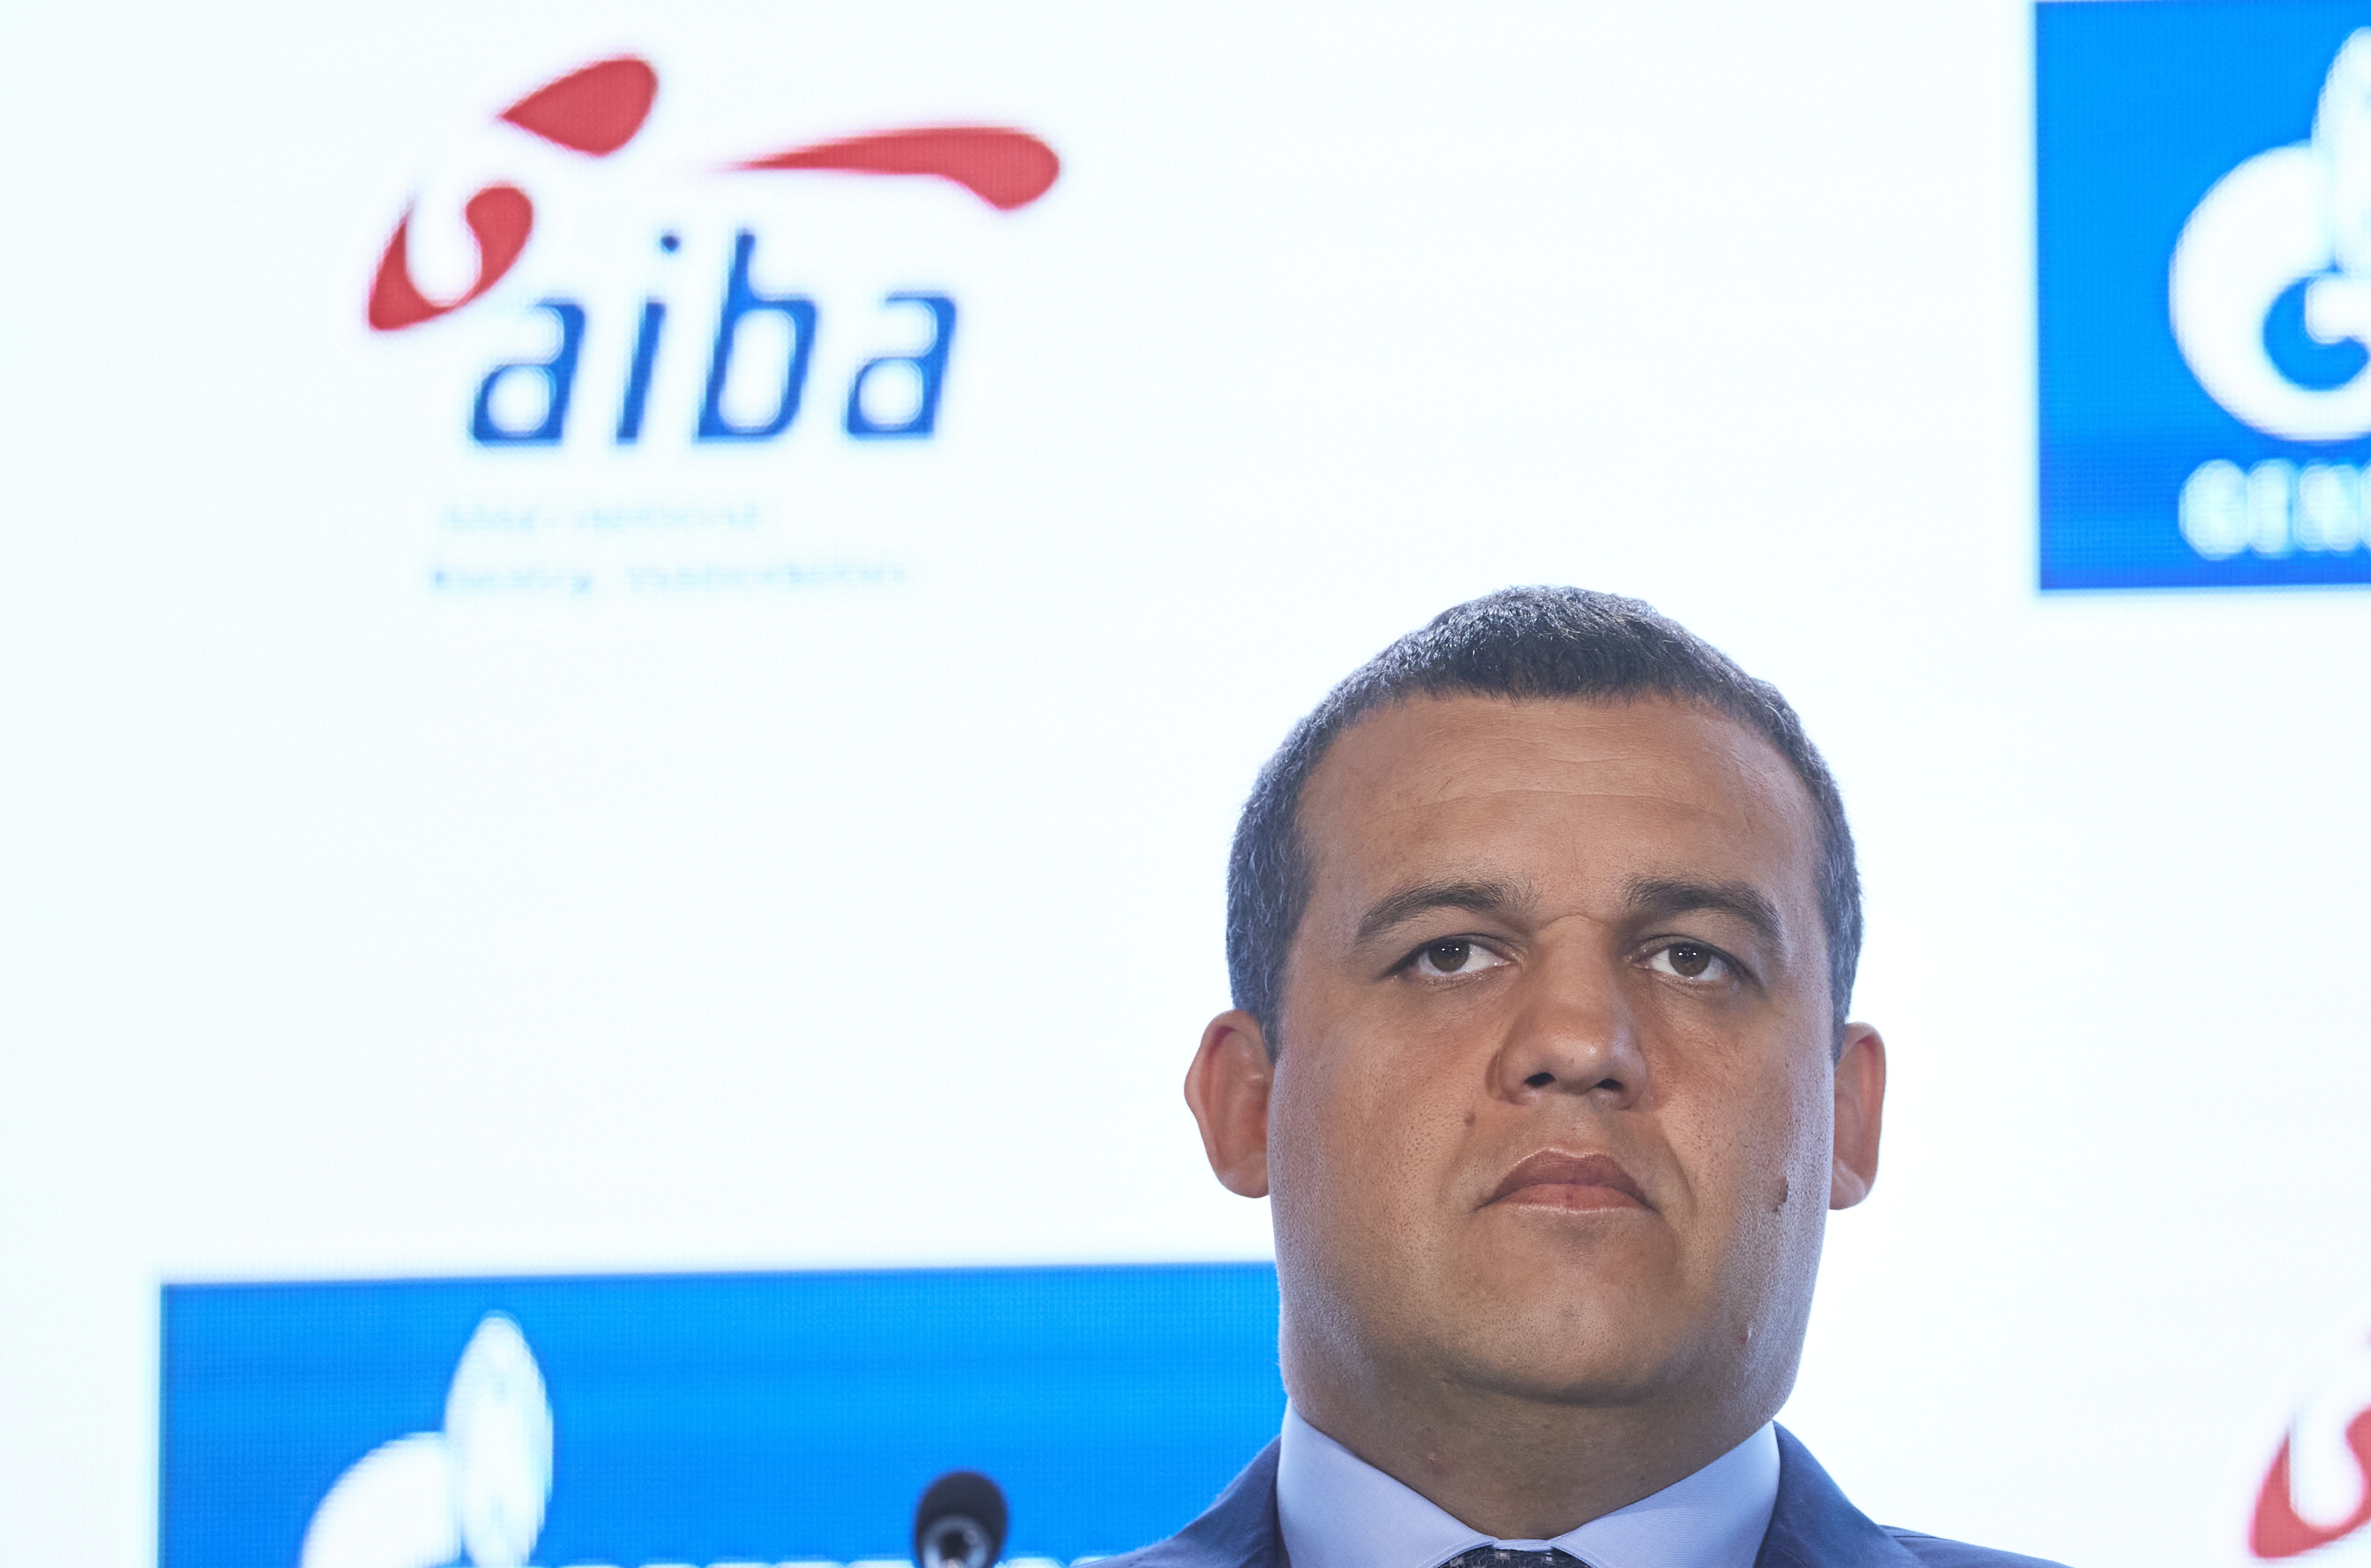 IBA mess continues as Kremlev retains presidency without election